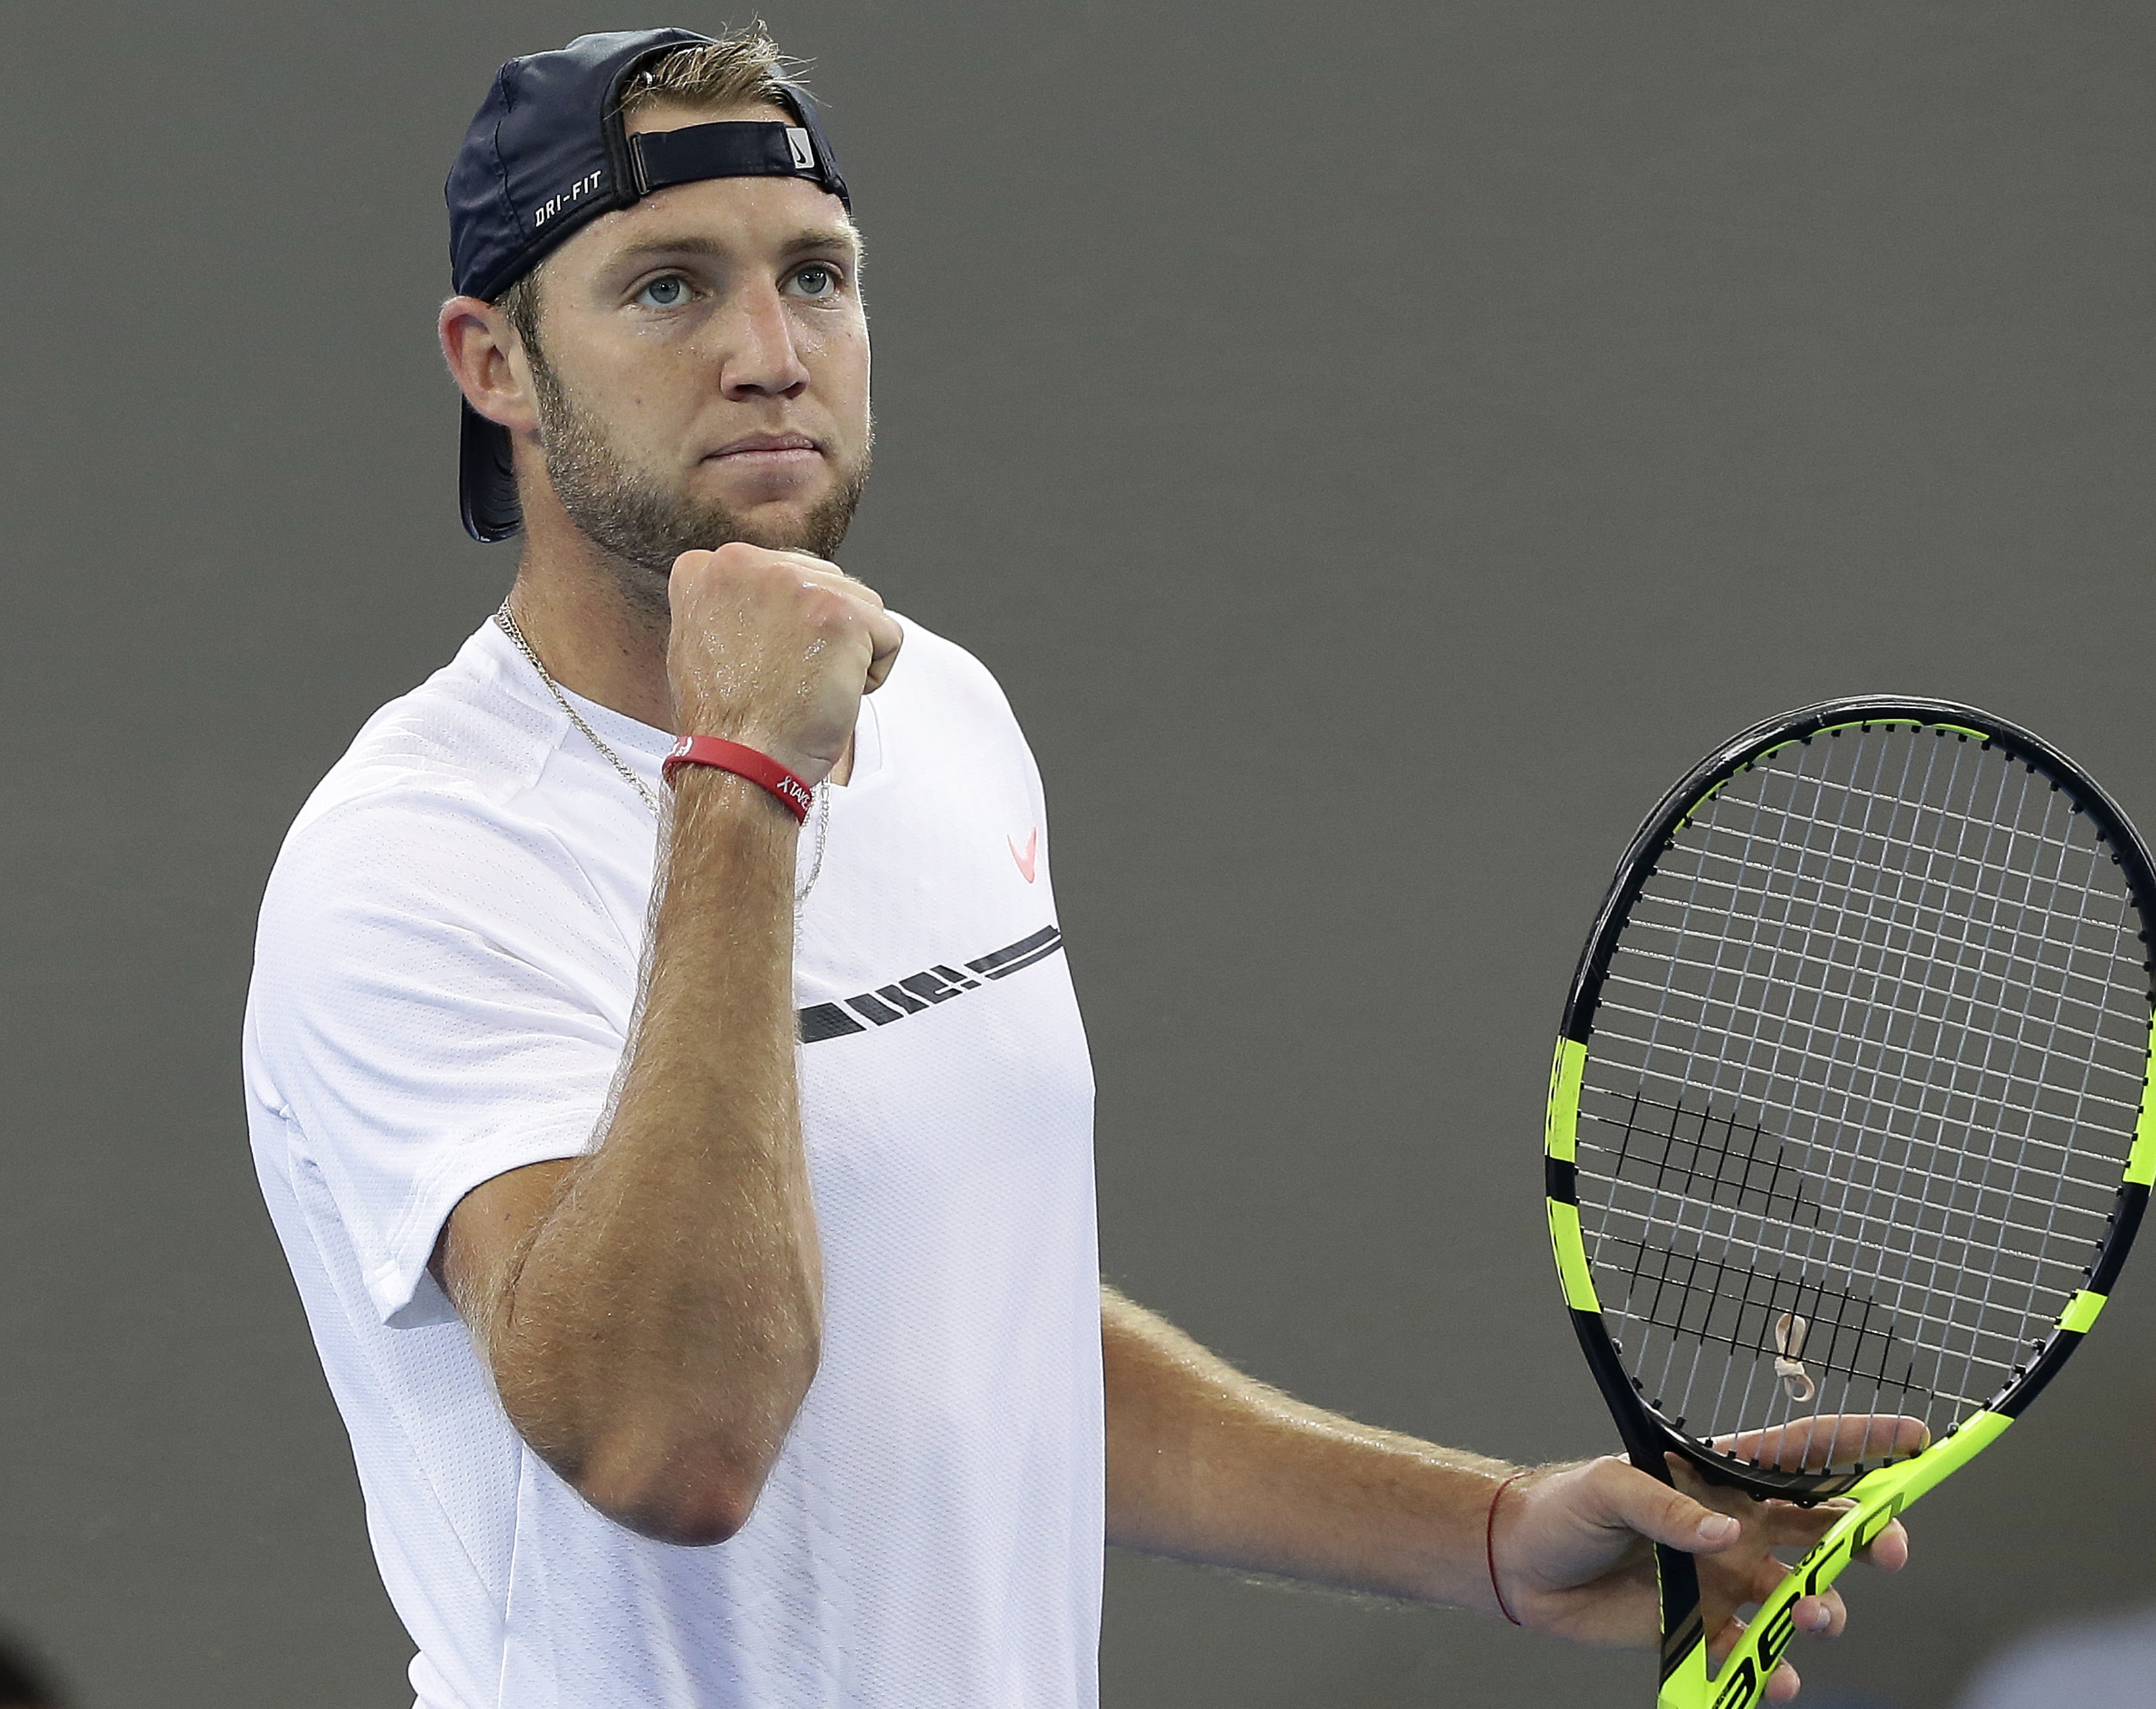 Jack Sock is having a career year, but is he playing too much tennis